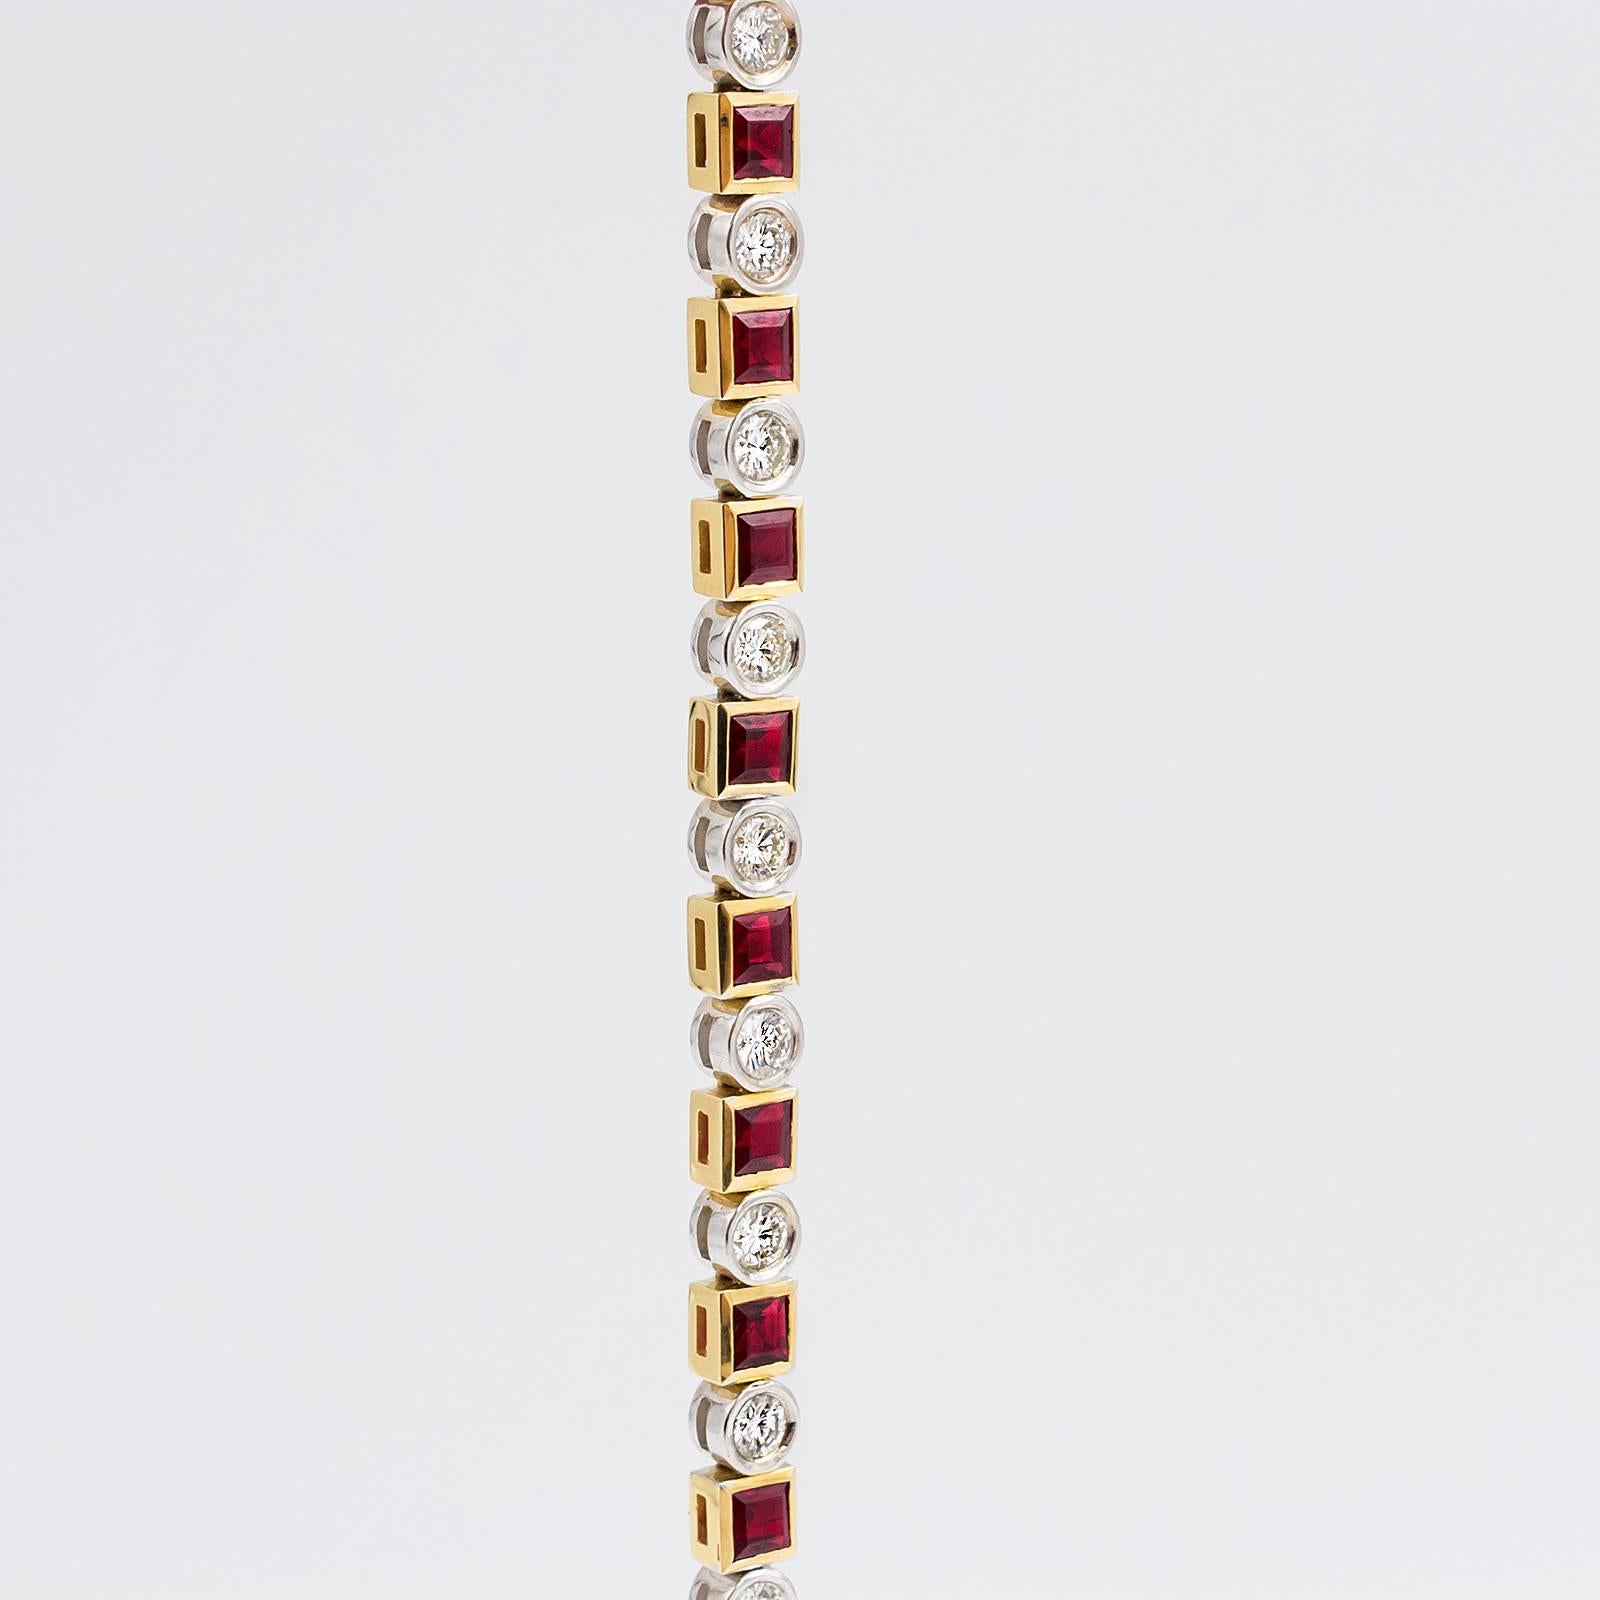 This gorgeous bracelet contains 17 Rubies (natural Corundums) square cut and bezel set in 18k yellow gold. The Rubies are separated by 17 round, brilliant cut Diamonds set in 18k white gold Collets.

The bracelet is flexible and sits beautifully on